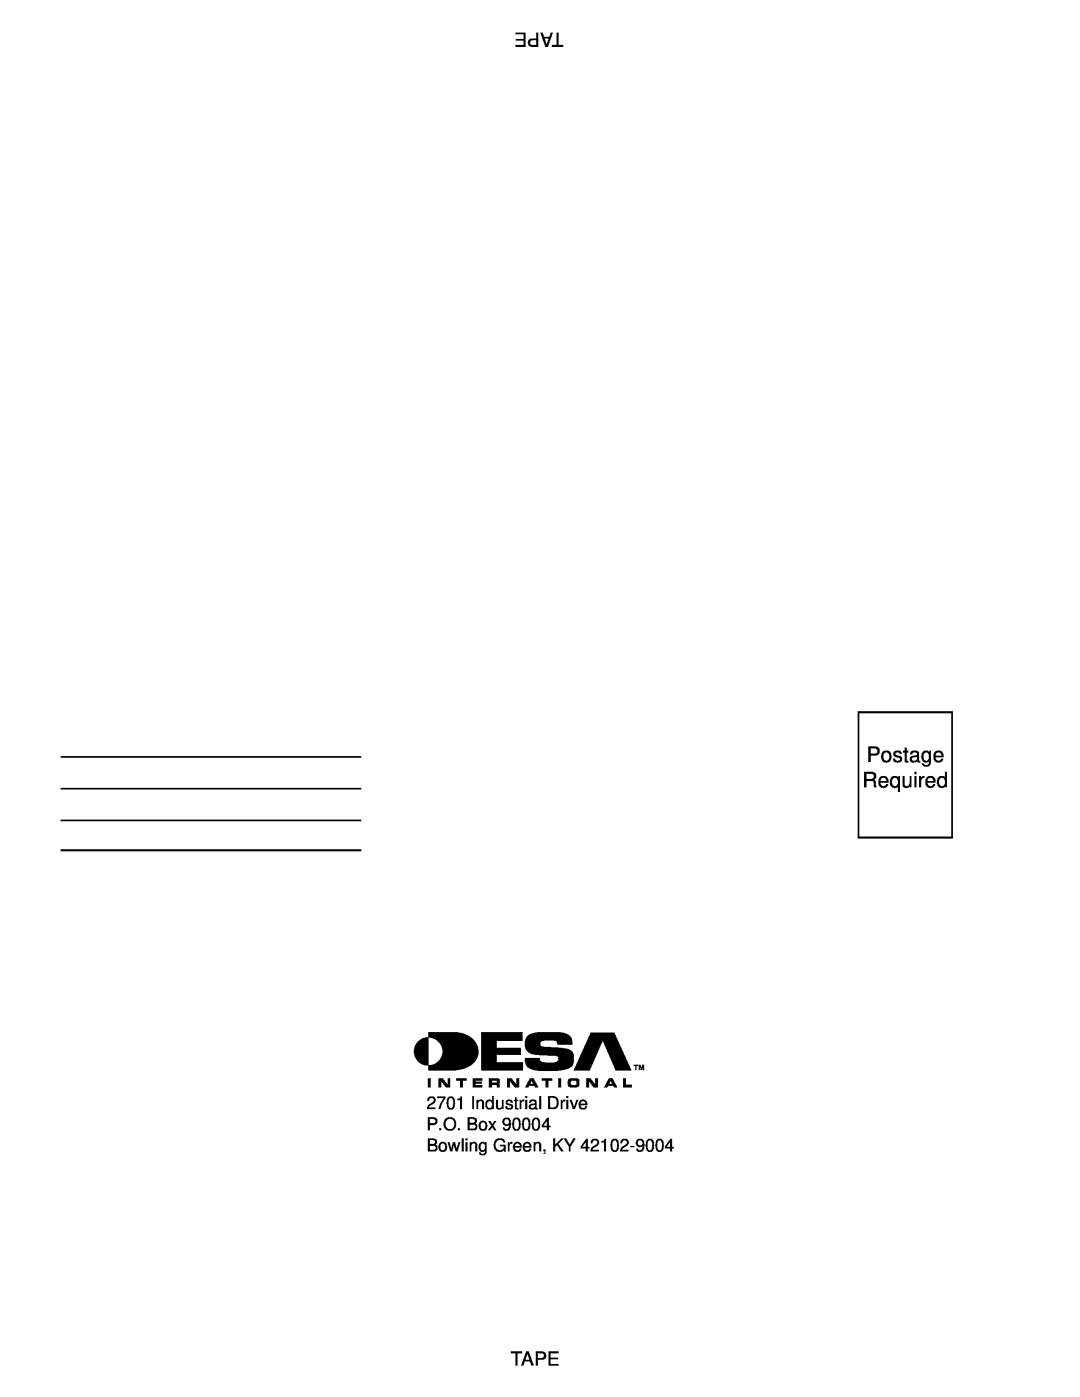 Desa 40, 80, 60 owner manual Postage Required, Tape, Industrial Drive P.O. Box Bowling Green, KY 